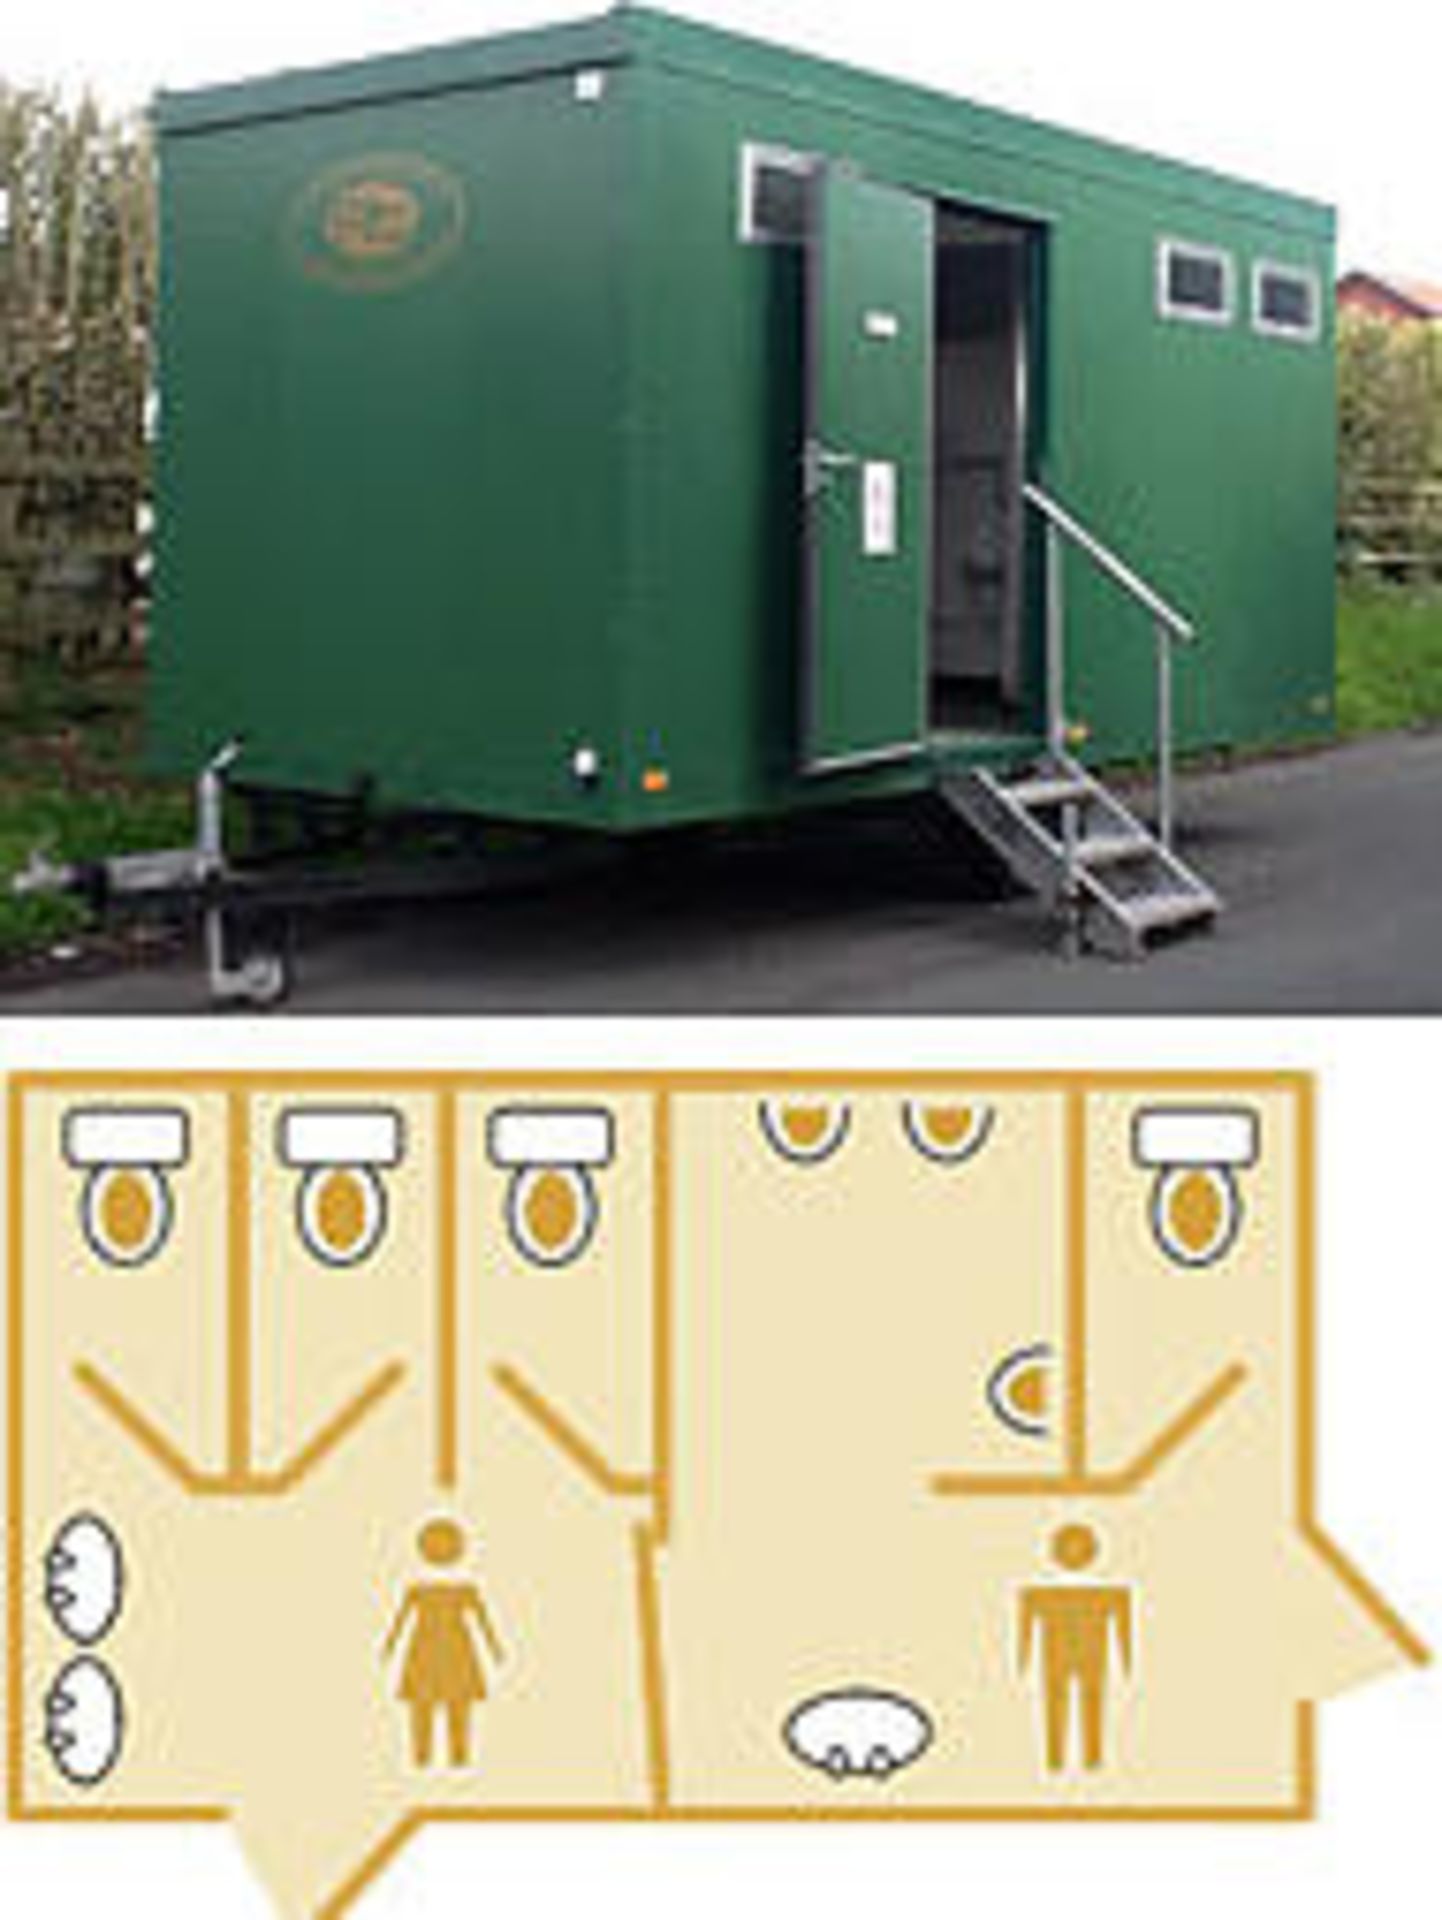 Springfield standard single axle toilet trailer 3 + 1 + urinal toilet trailer with mains connection - Image 20 of 20